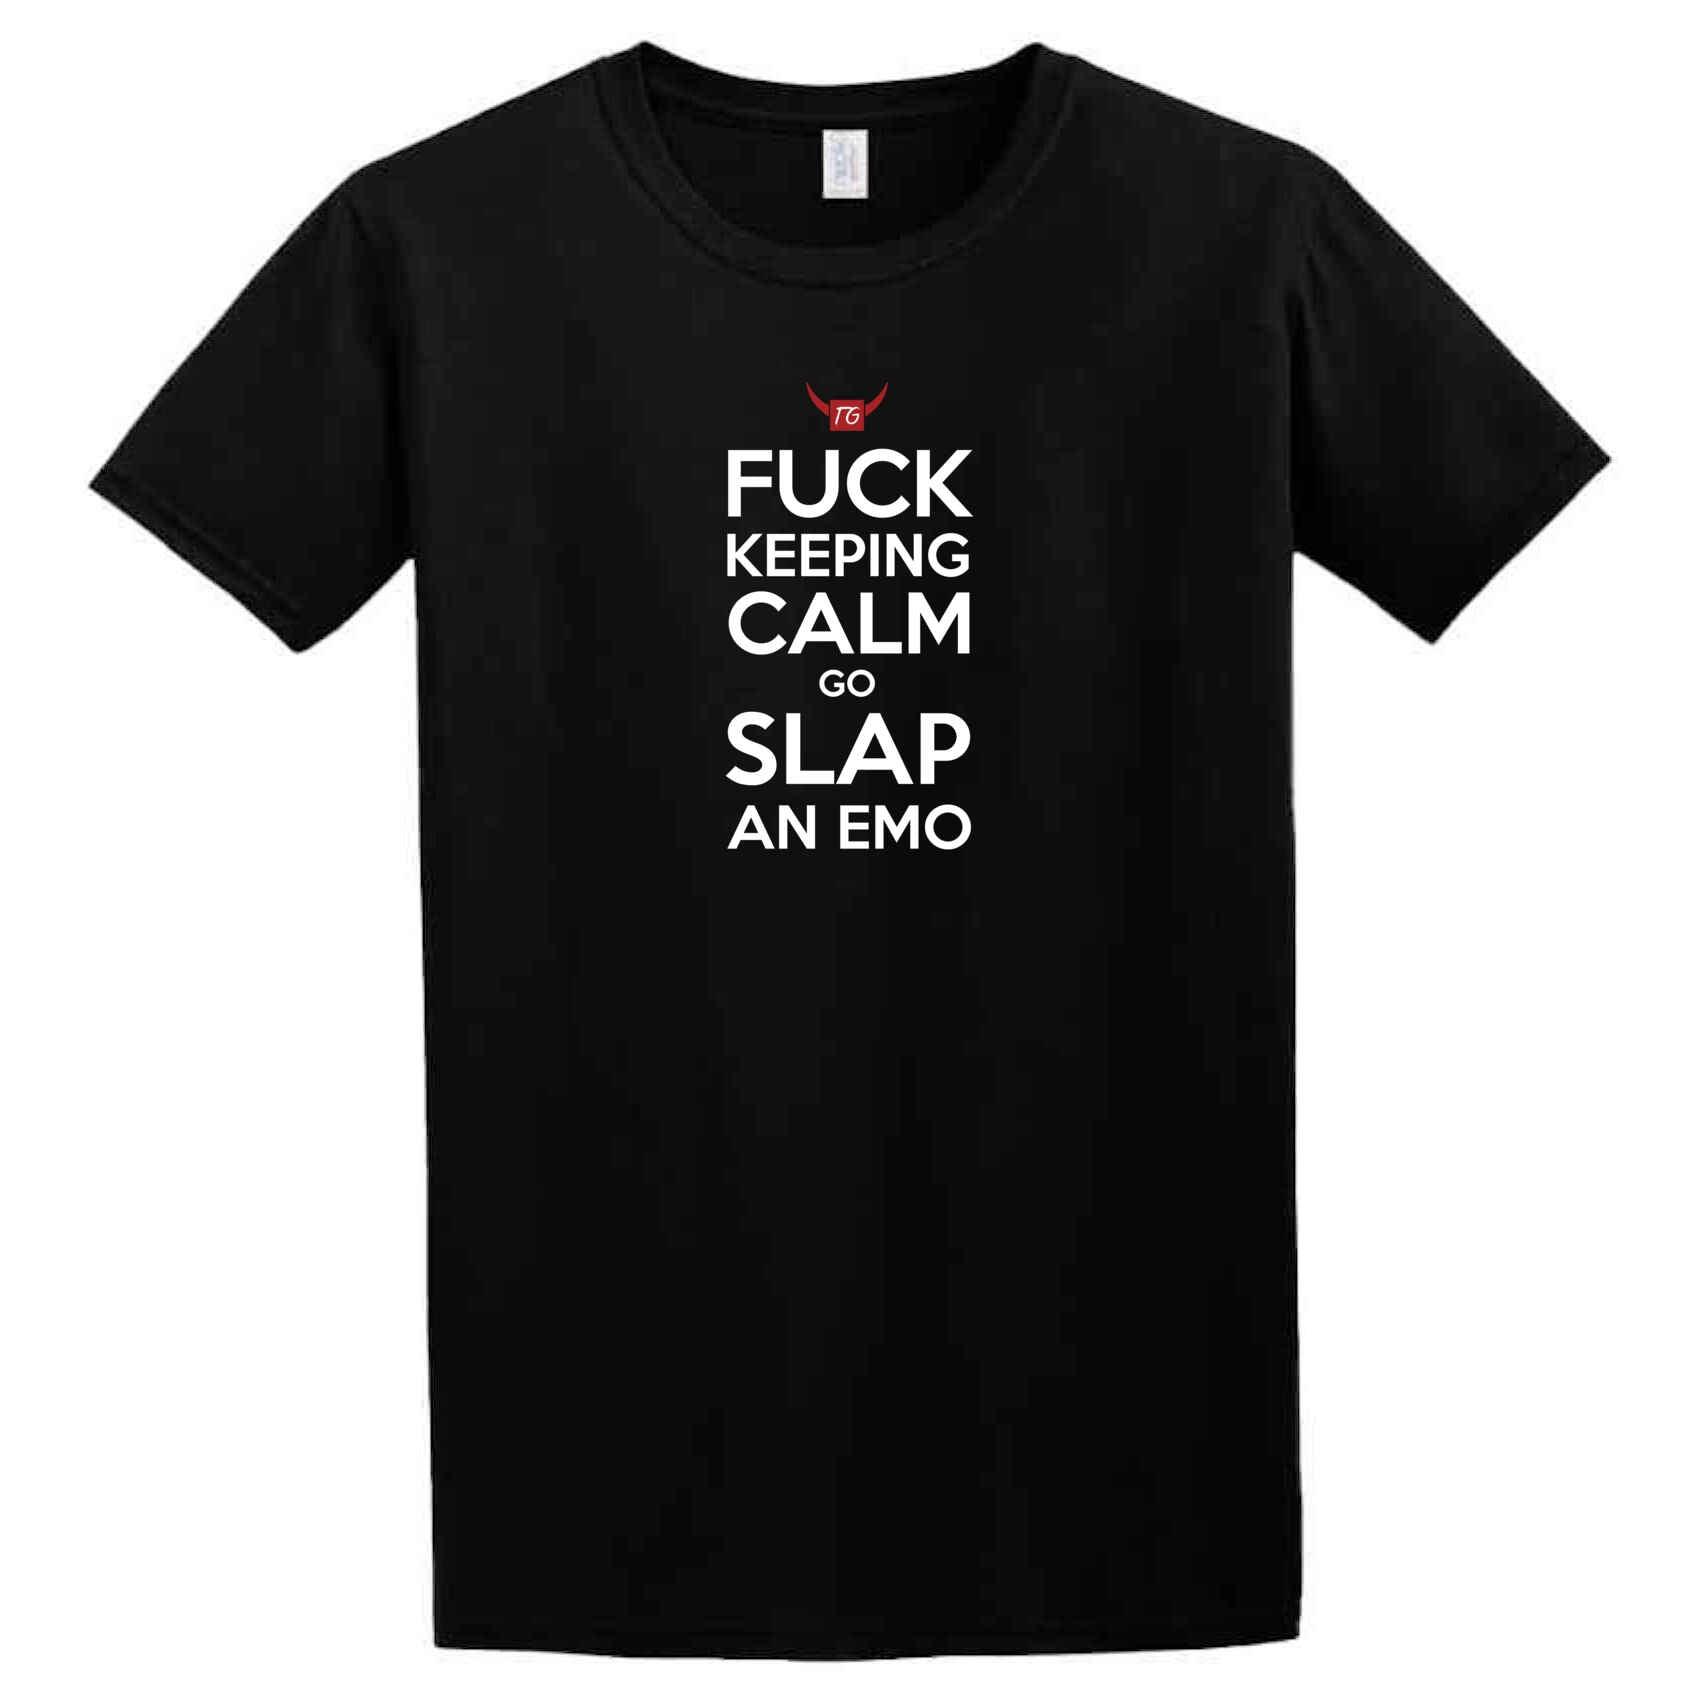 A Slap An Emo T-Shirt that says fuck calm and snap an emo from Twisted Gifts.